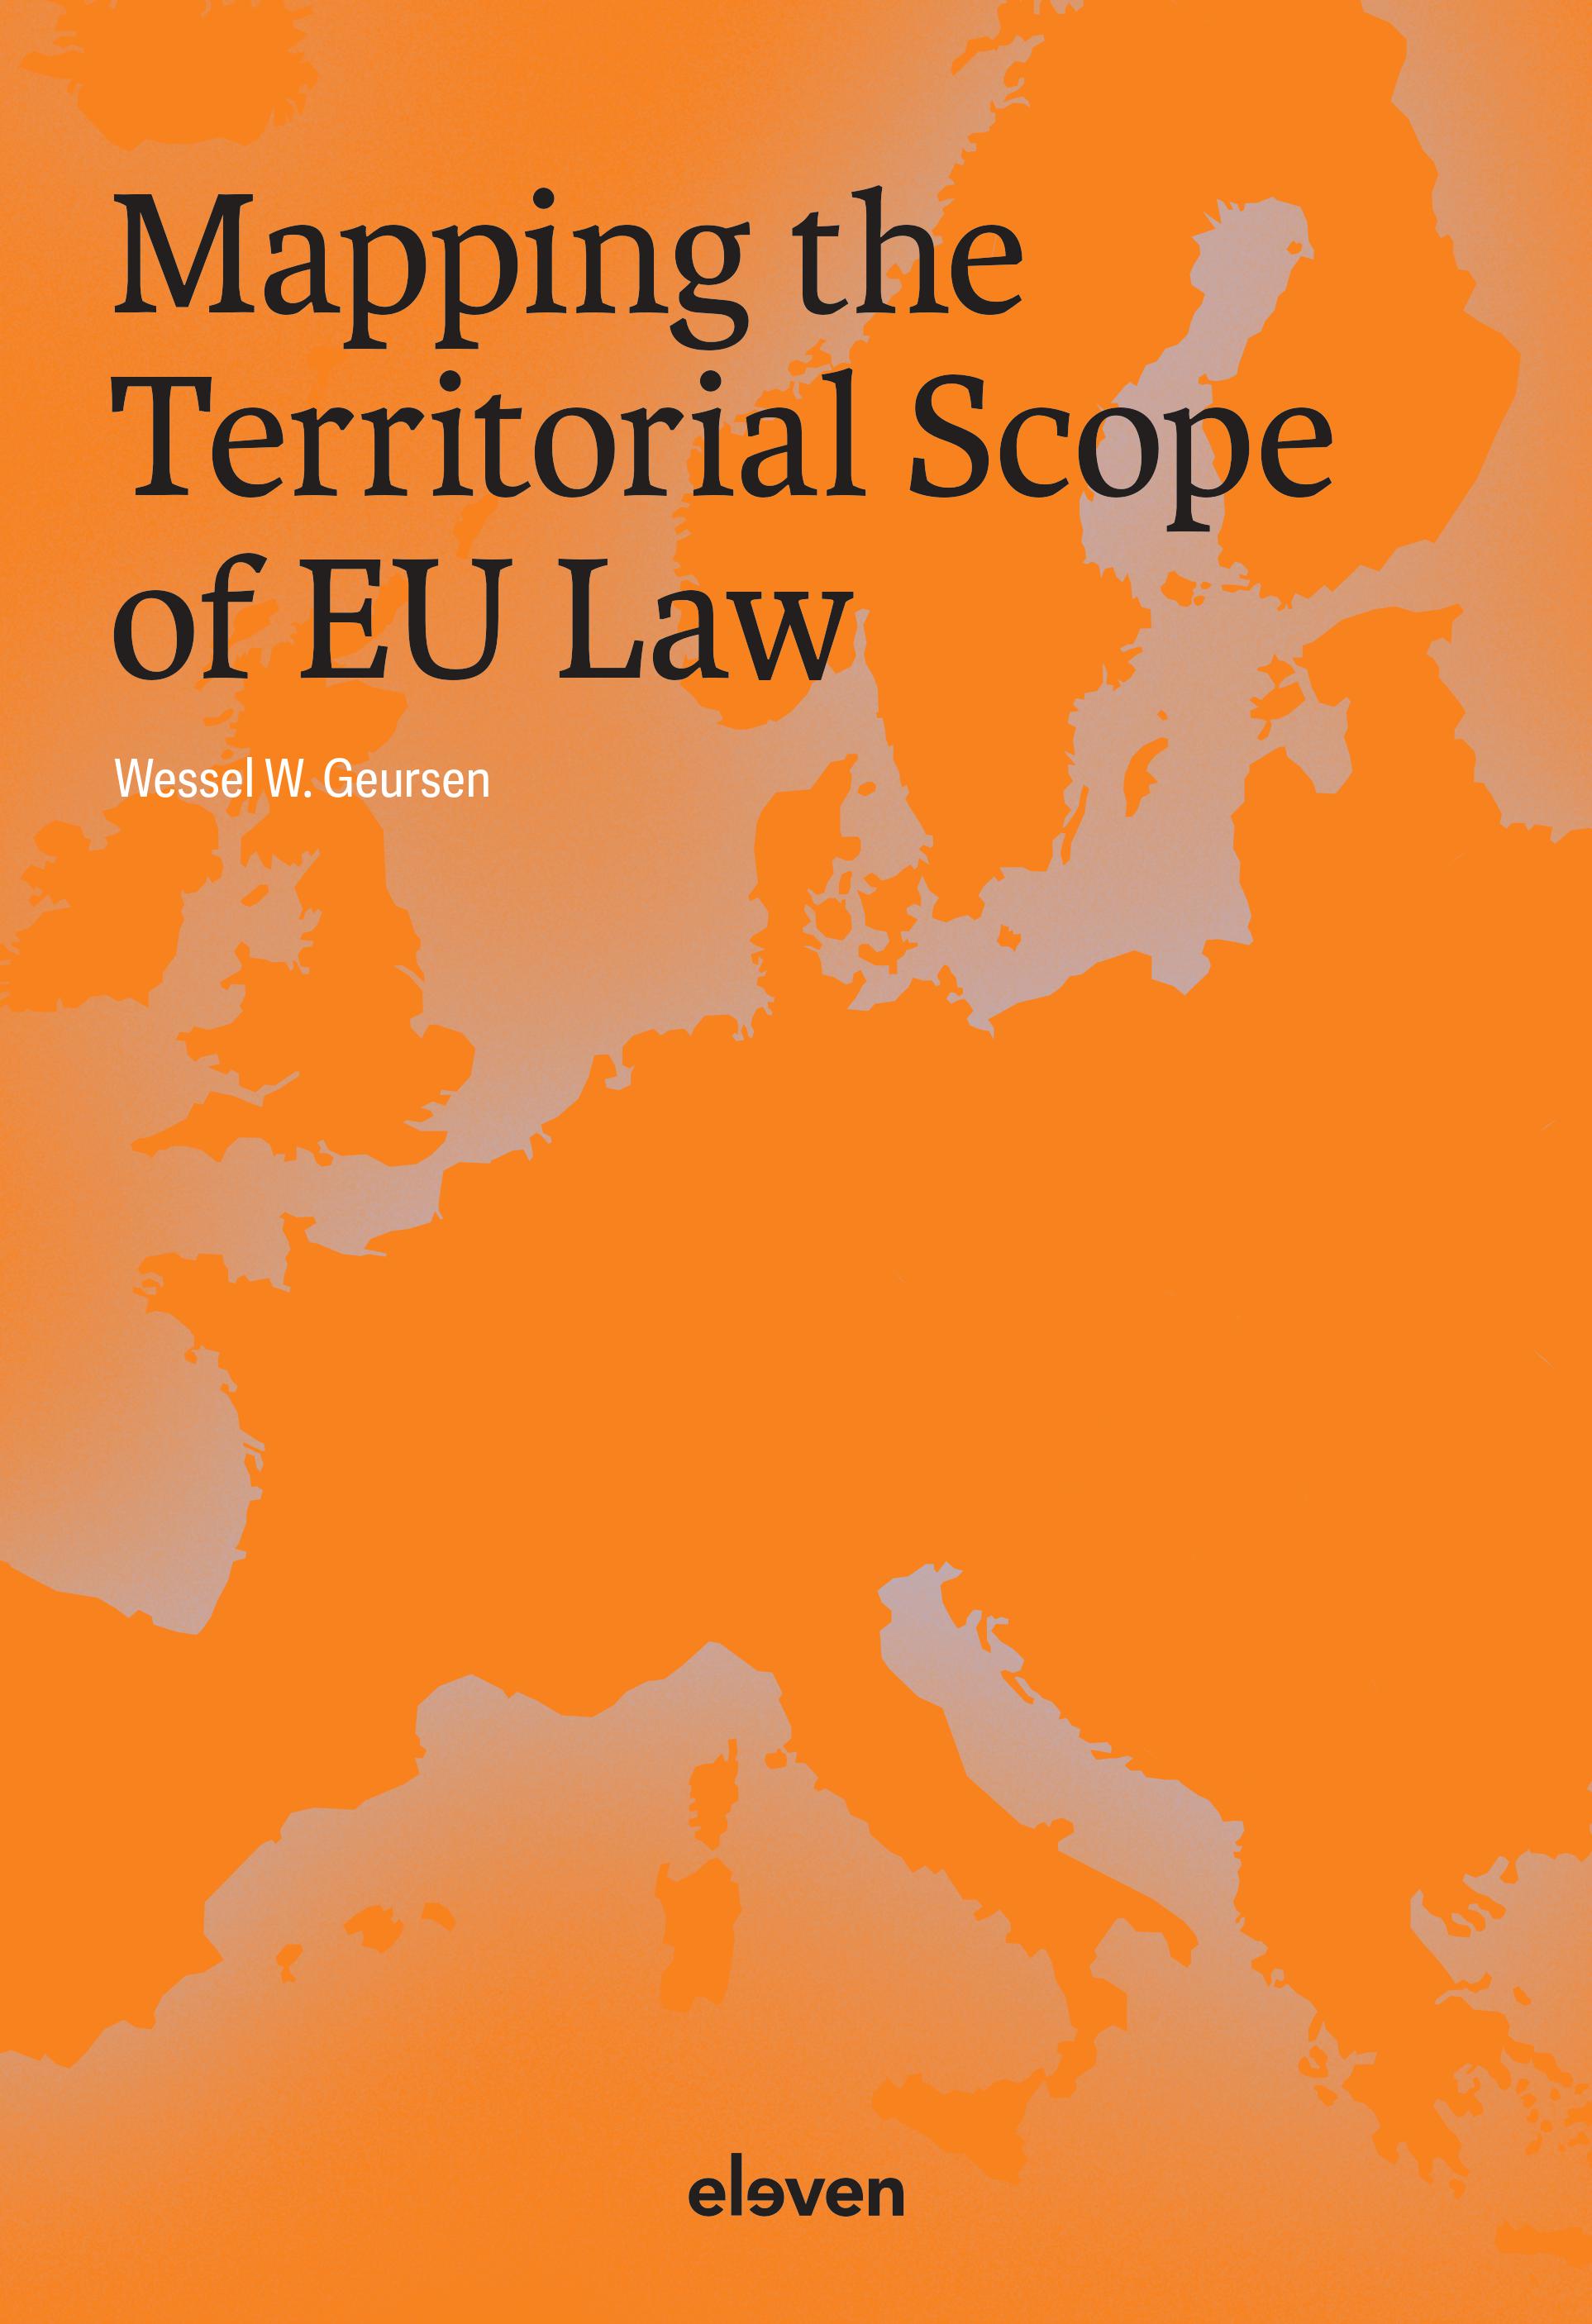 Mapping the Territorial Scope of EU Law